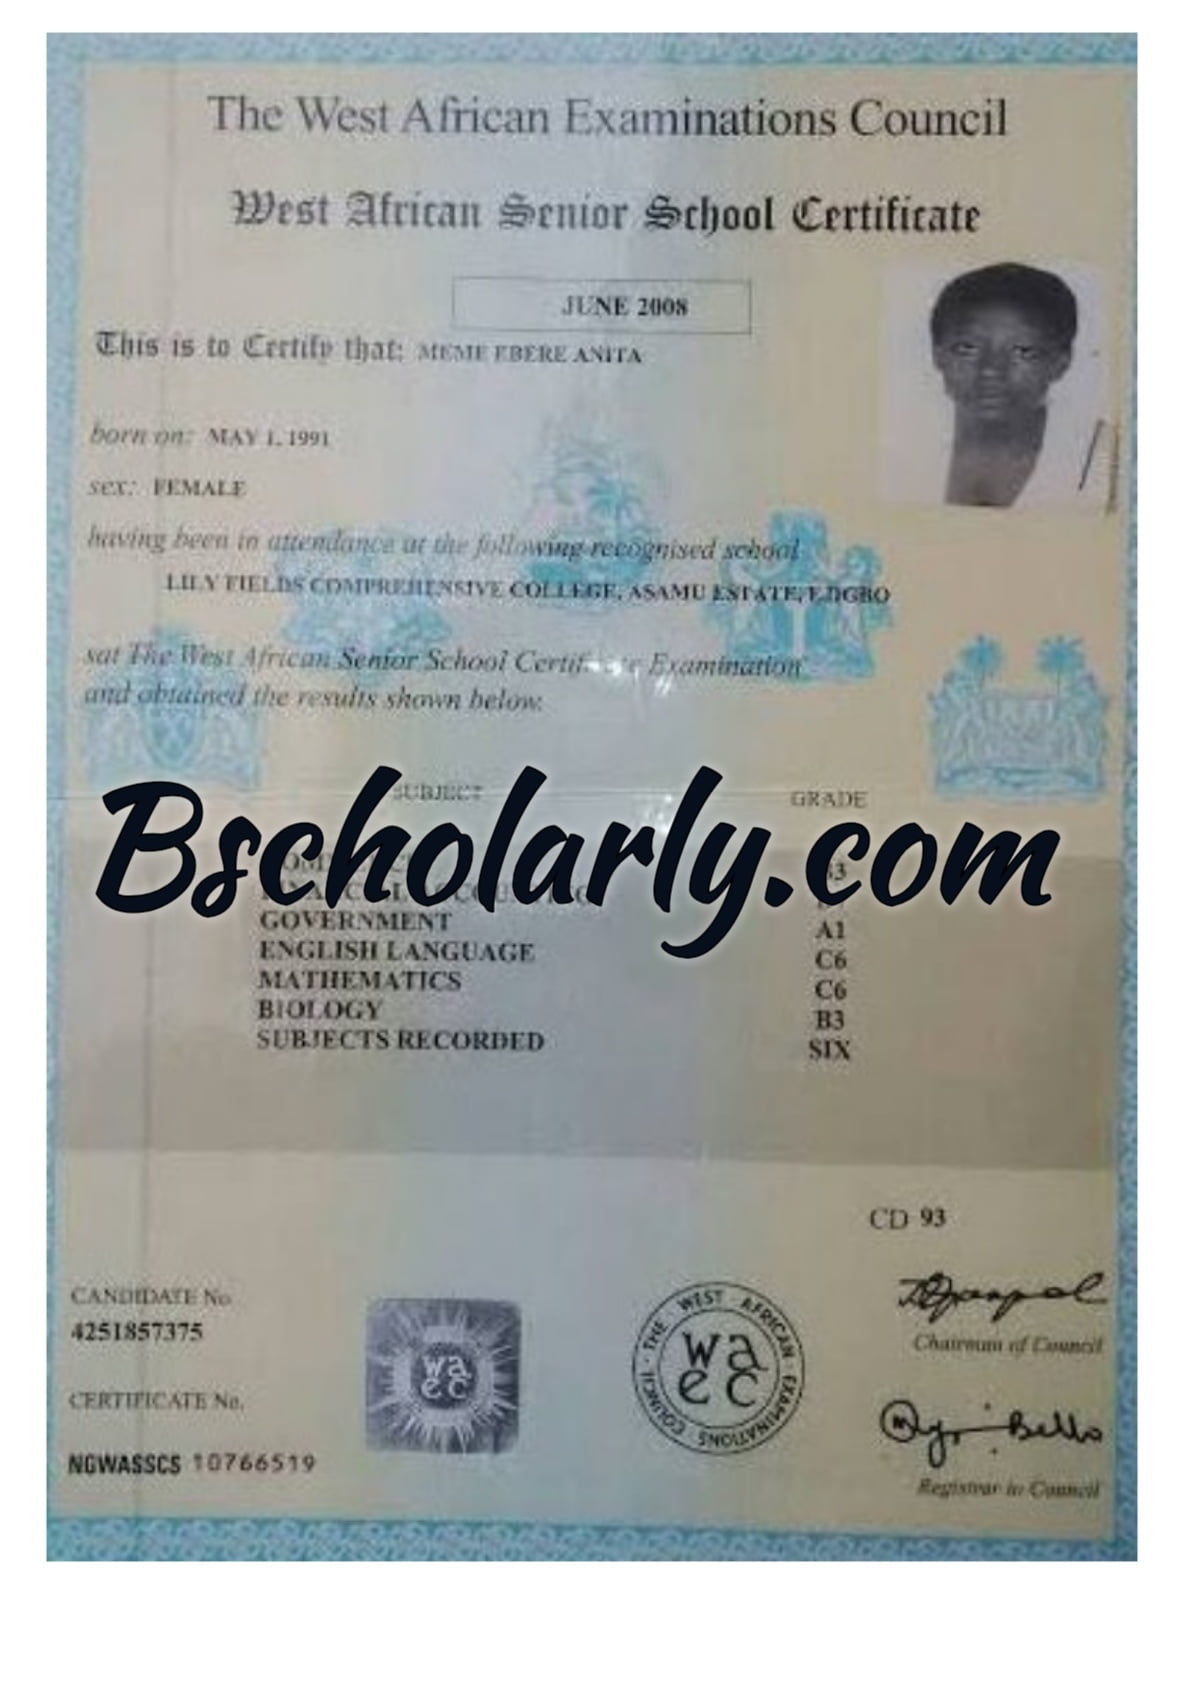 How To Get Original GCE Certificate: Collection Of WAEC GCE Certificate Requirements